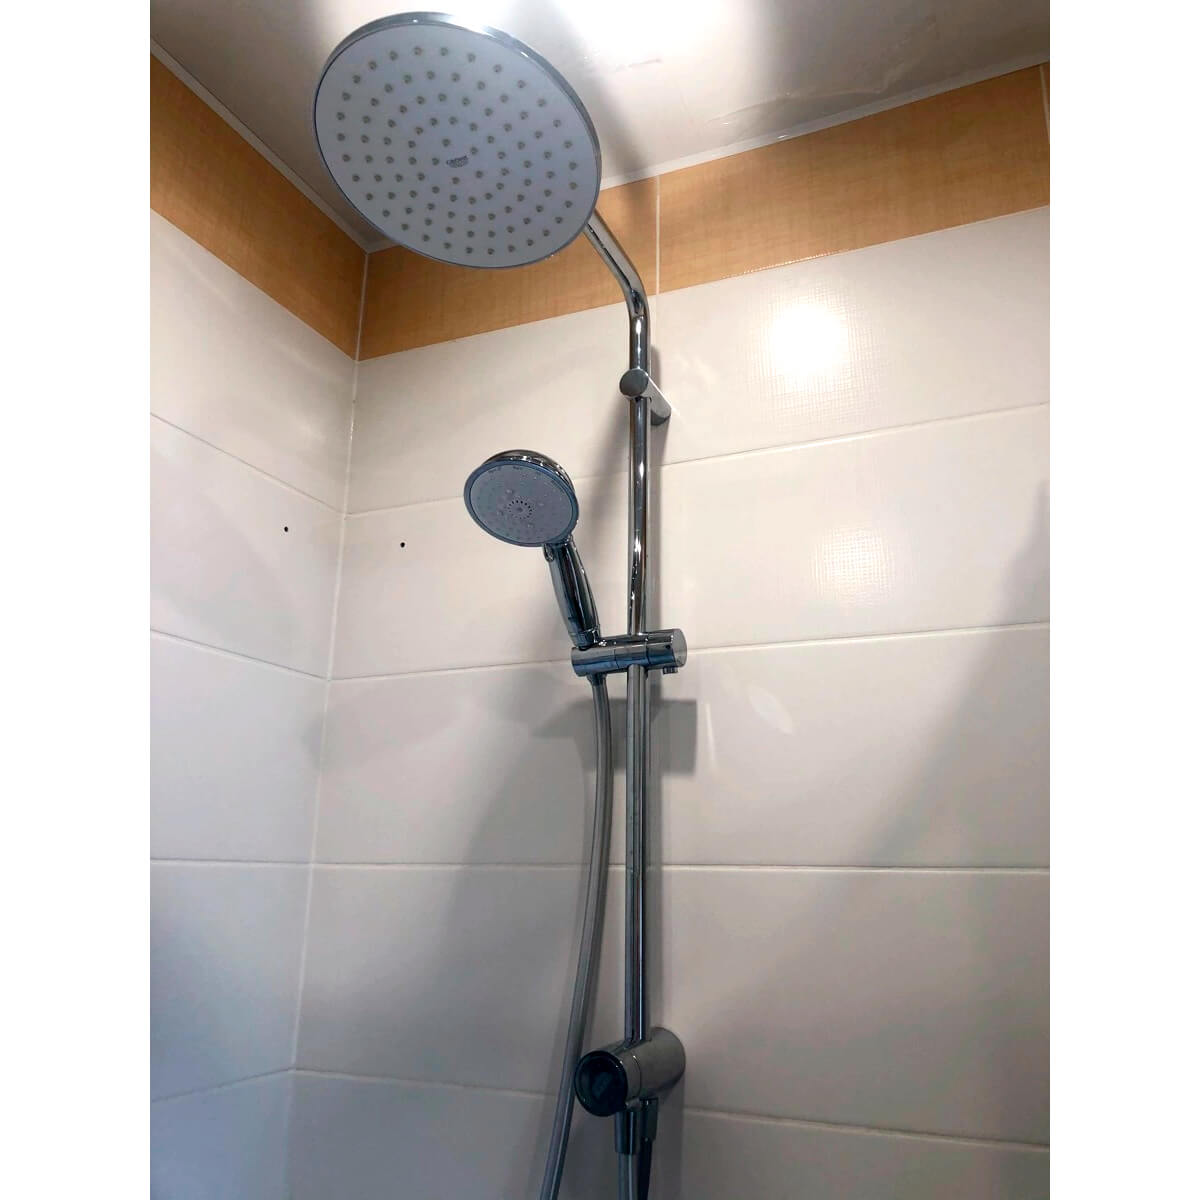 Grohe new 200. Душевая стойка Grohe New Tempesta Rustic 27399002 хром. Душевая система Grohe New Tempesta 200. Grohe New Tempesta Rustic System 200. 27399002 Grohe.